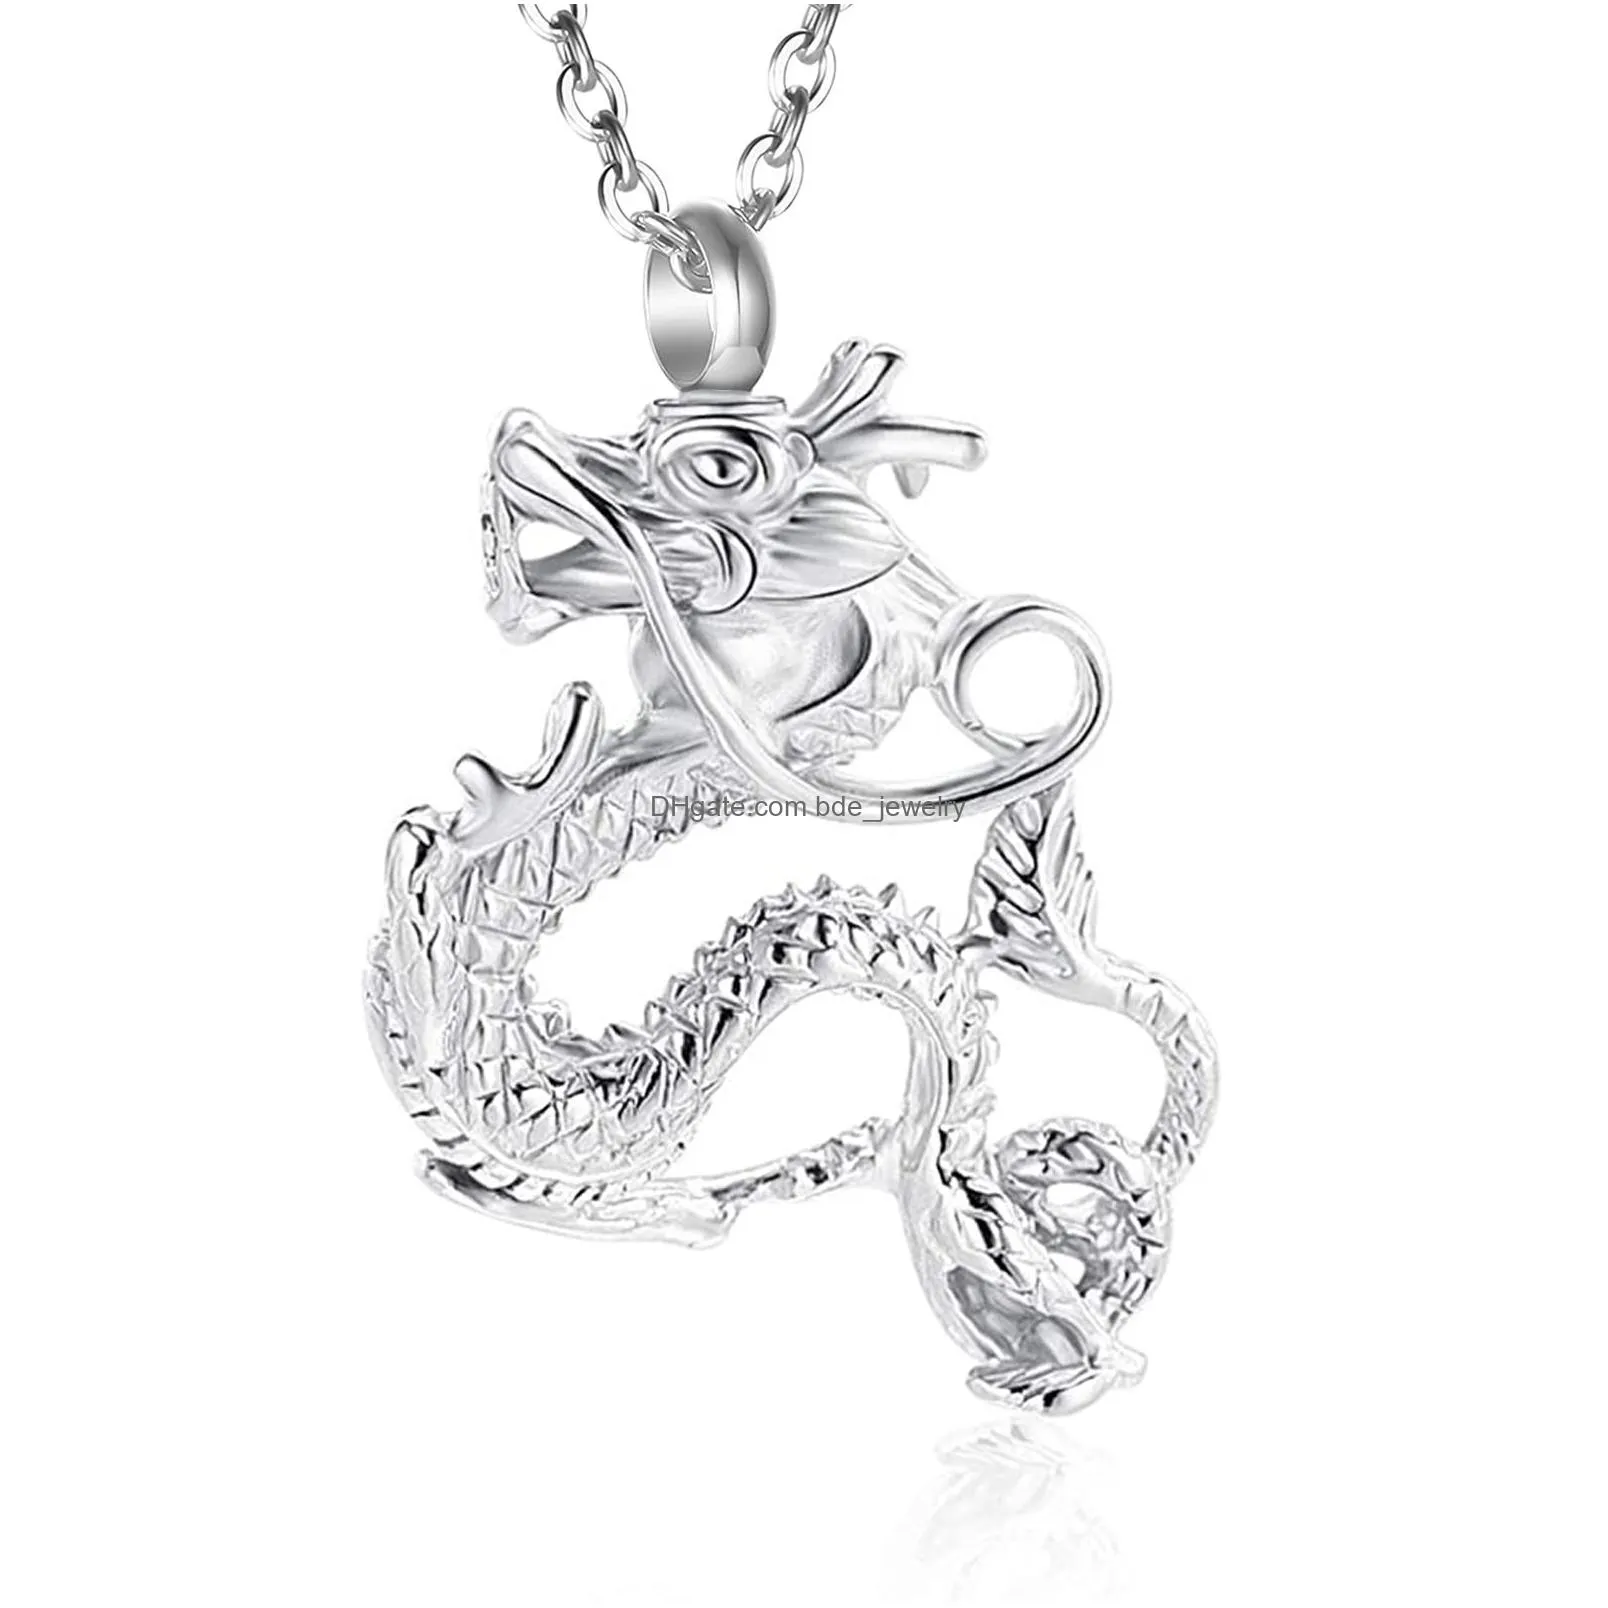 dragon cremation jewelry for ashes stainless steel keepsake pendant holder ashes memorial funeral urn necklace for men women242m